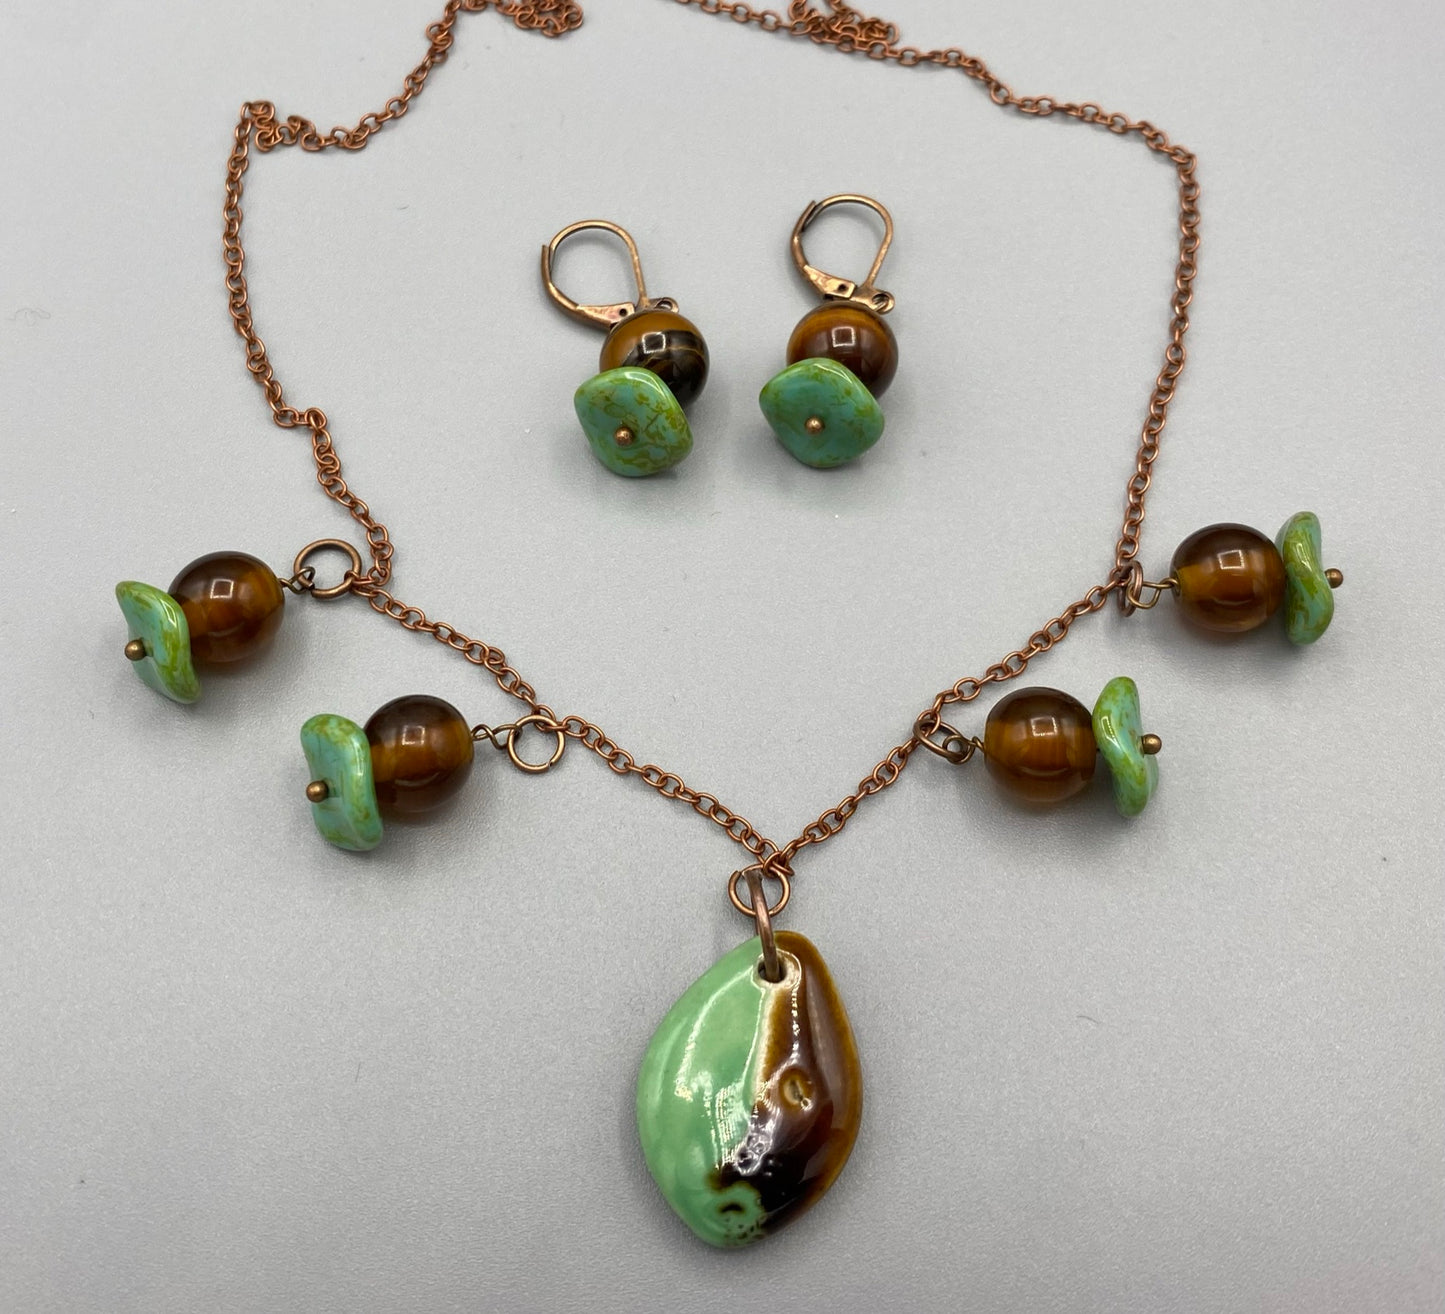 Matching Green and Brown Necklace and Earring Set | Handmade Tiger's Eye Necklace